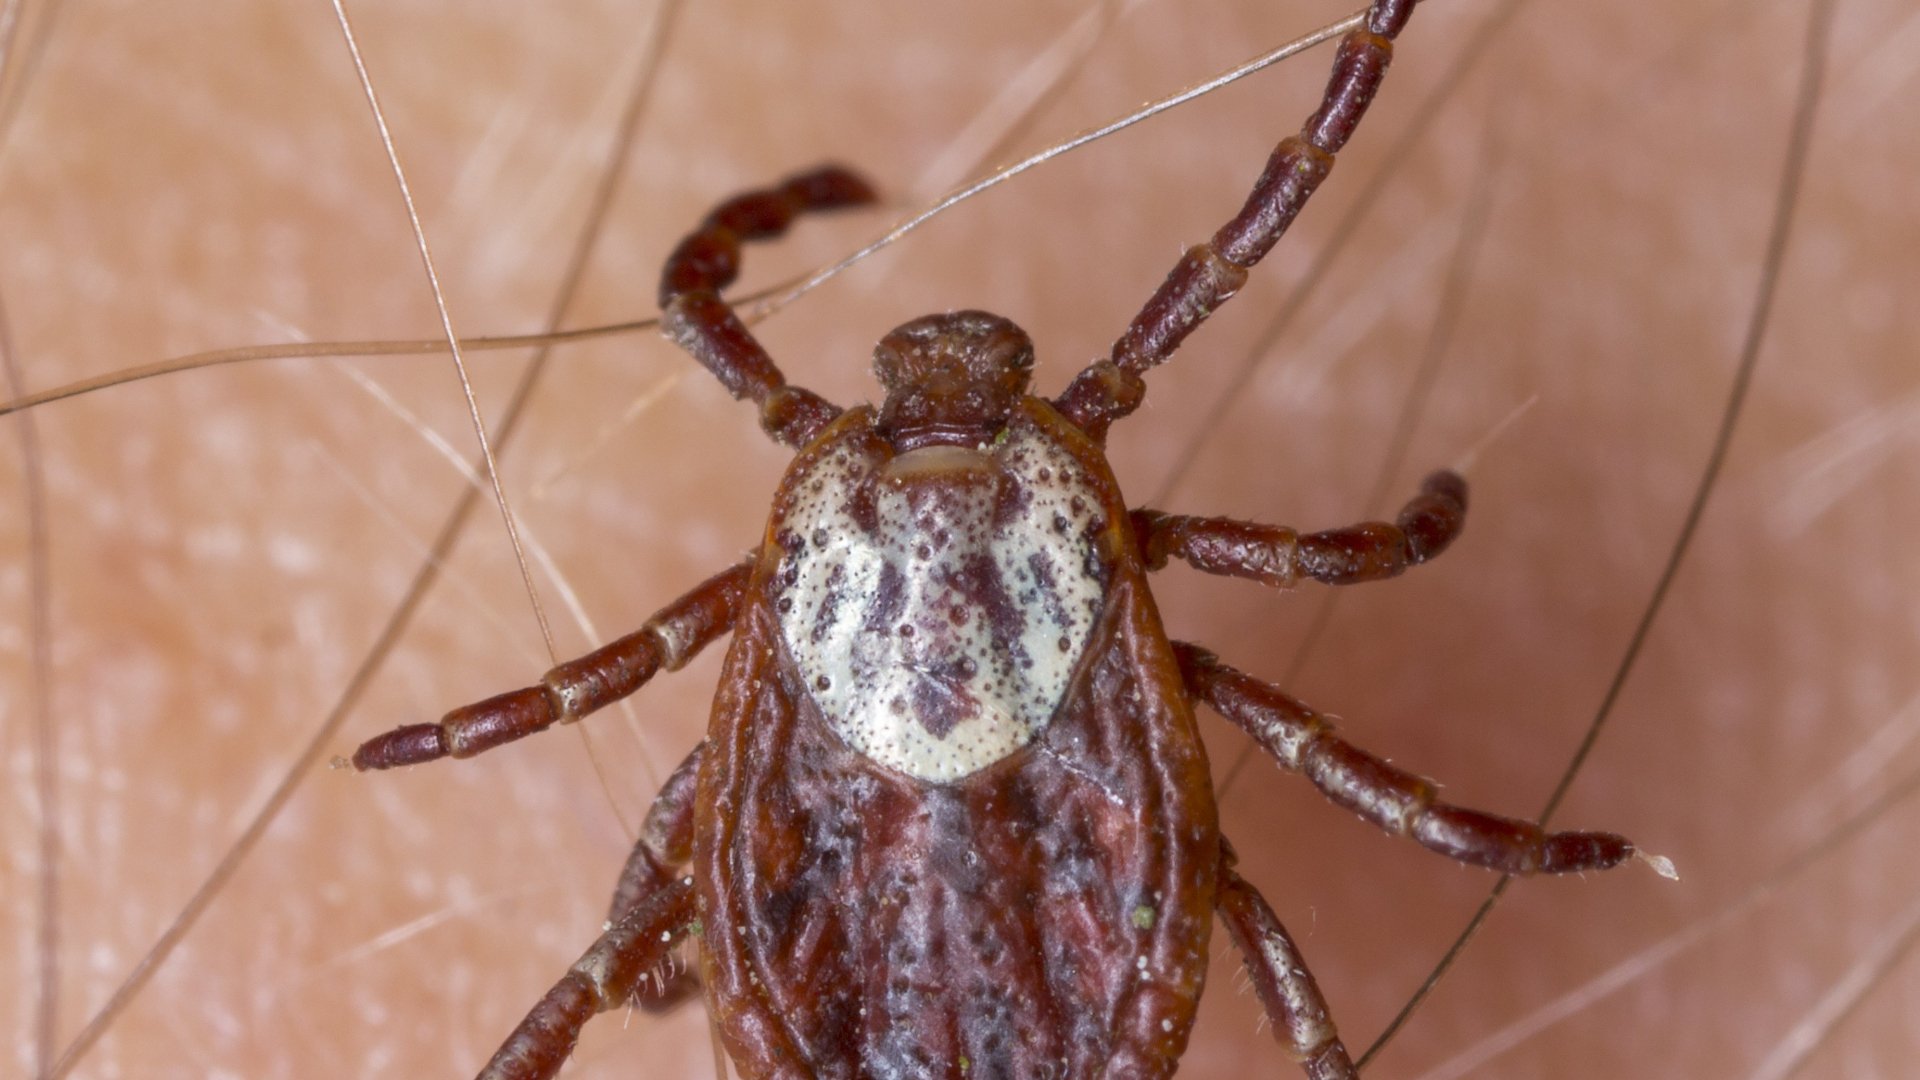 Tick Season Is Here in Michigan - Protect Your Kids & Pets